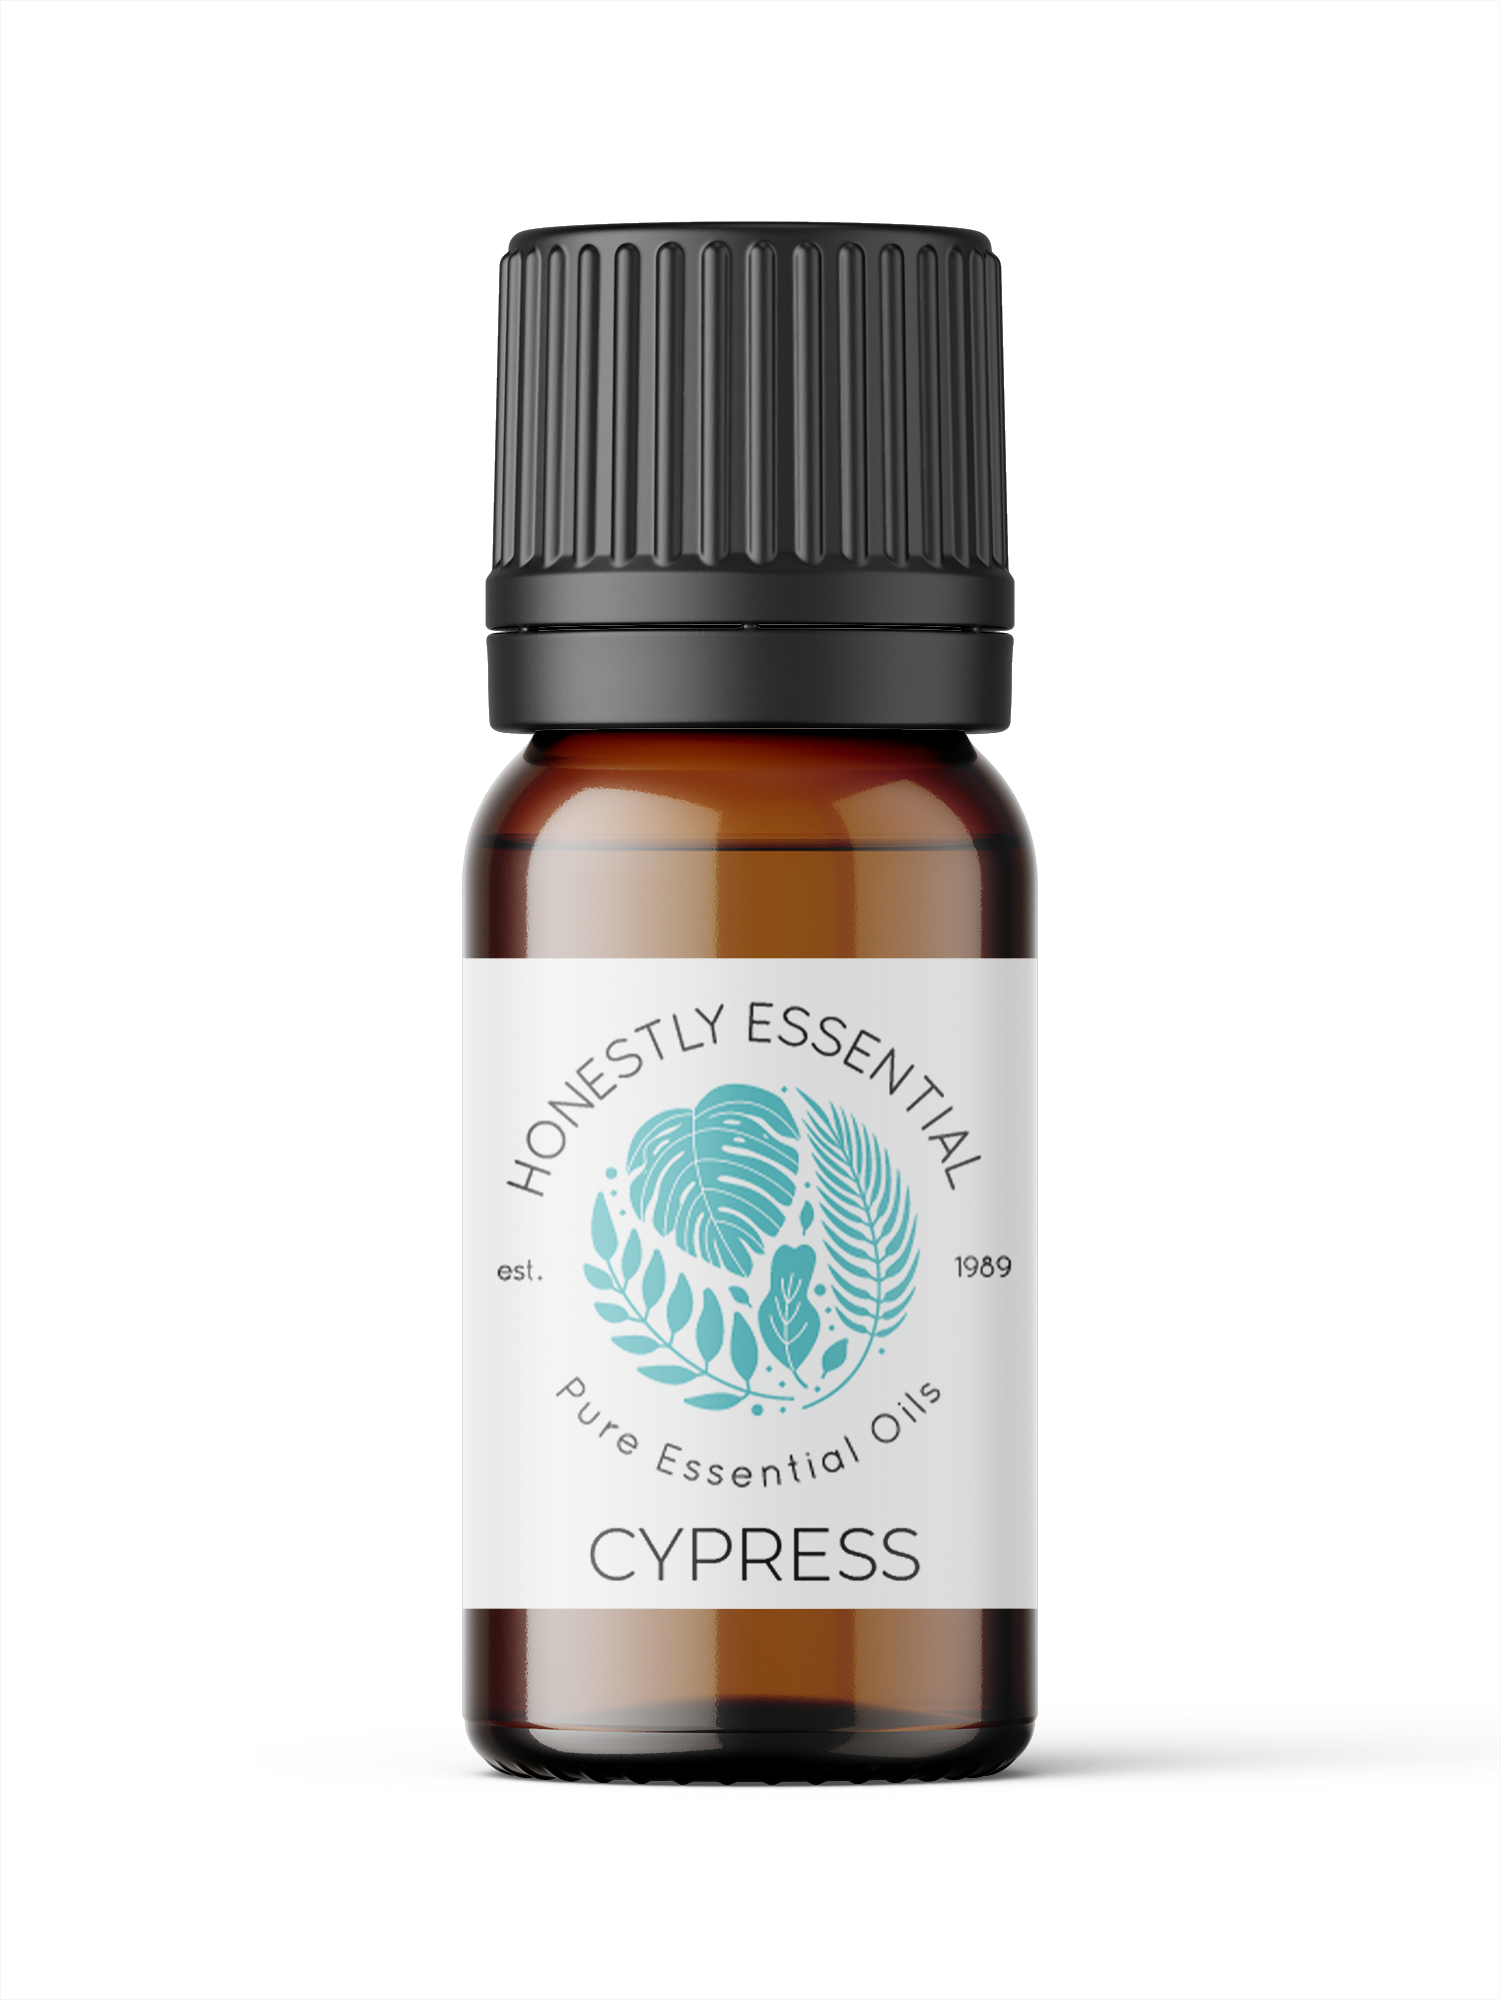 Cypress Essential Oil - Essential Oils | Honestly Essential Oils Insect and Pest Repellent, kid safe, tree, tree essential oil, trees